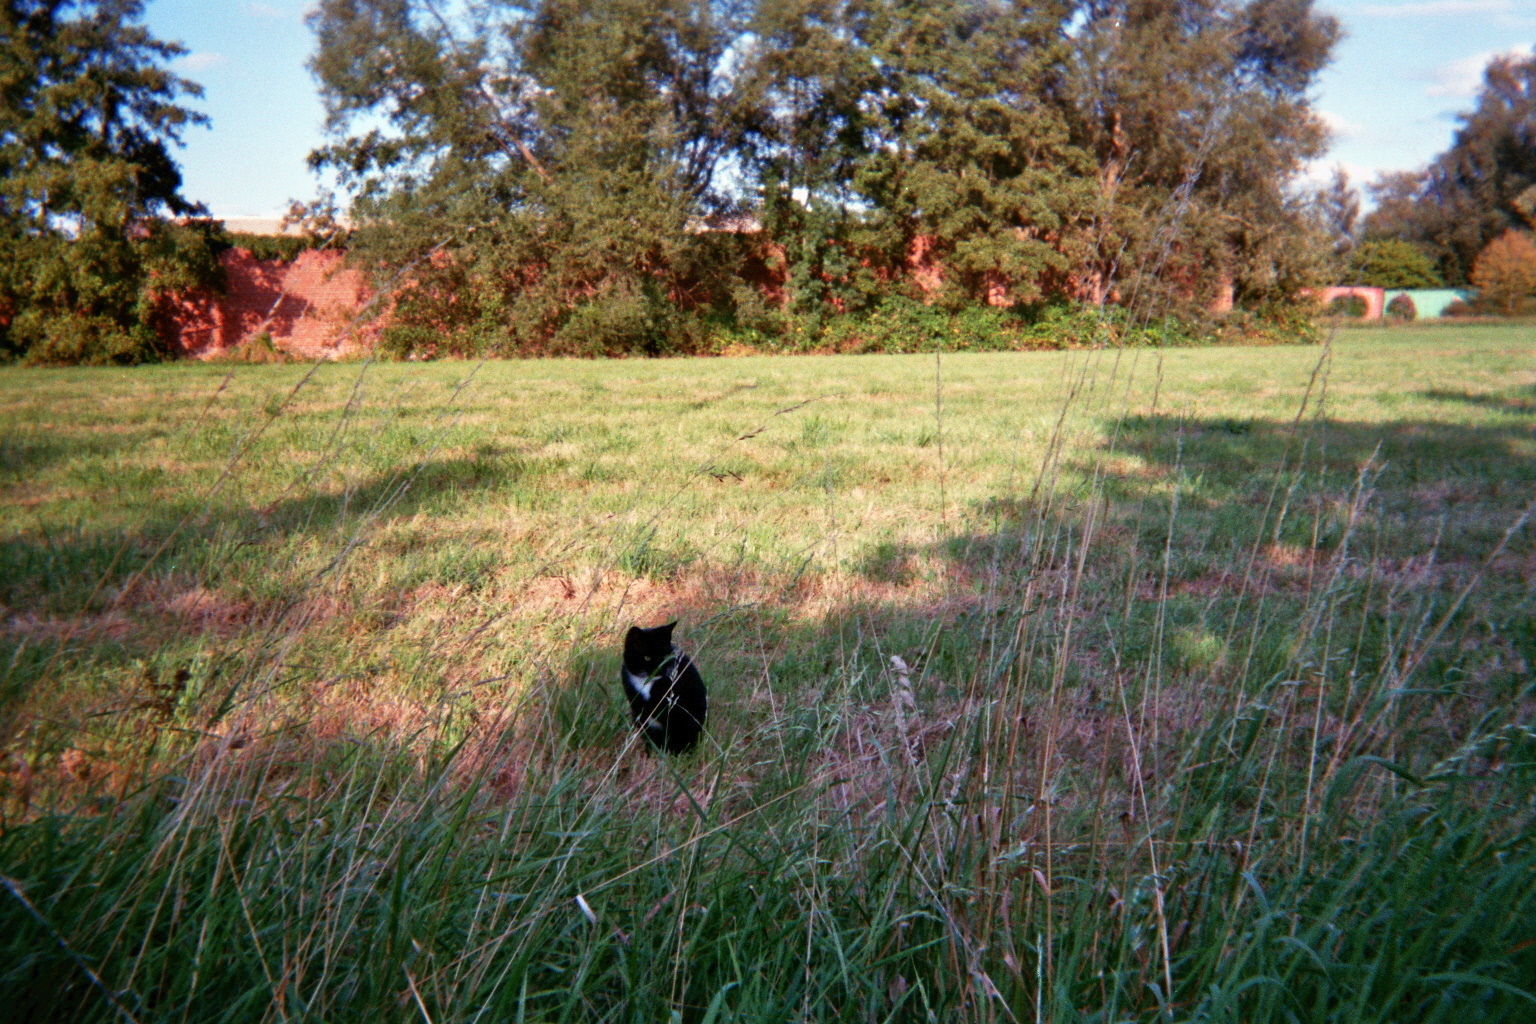 Black and white cat in a field of tall grass